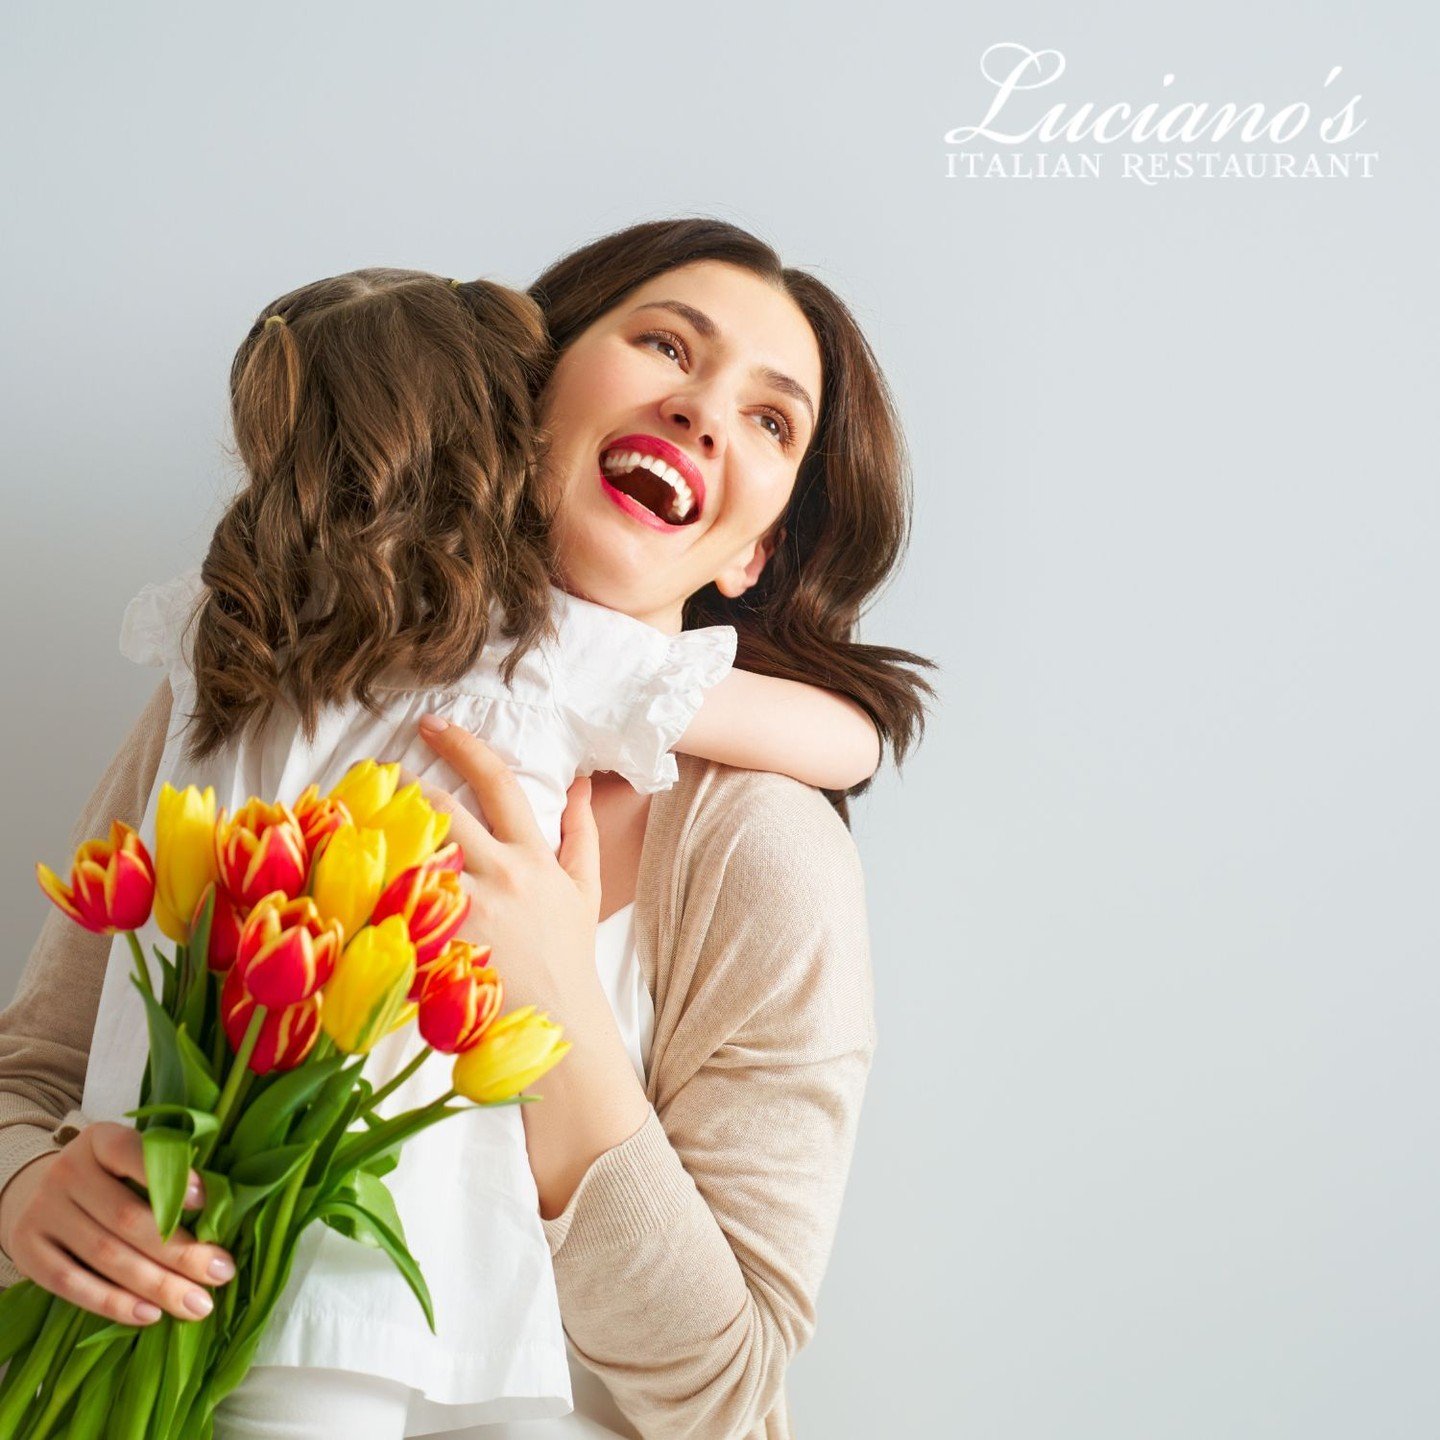 Treat Mom to a special Mother's Day at our place with a menu just for her. Reserve your table today for a celebration she won't forget!

Call for reservations: (586) 263-6540

See the menu here: Mother's Day Menu https://static1.squarespace.com/.../1